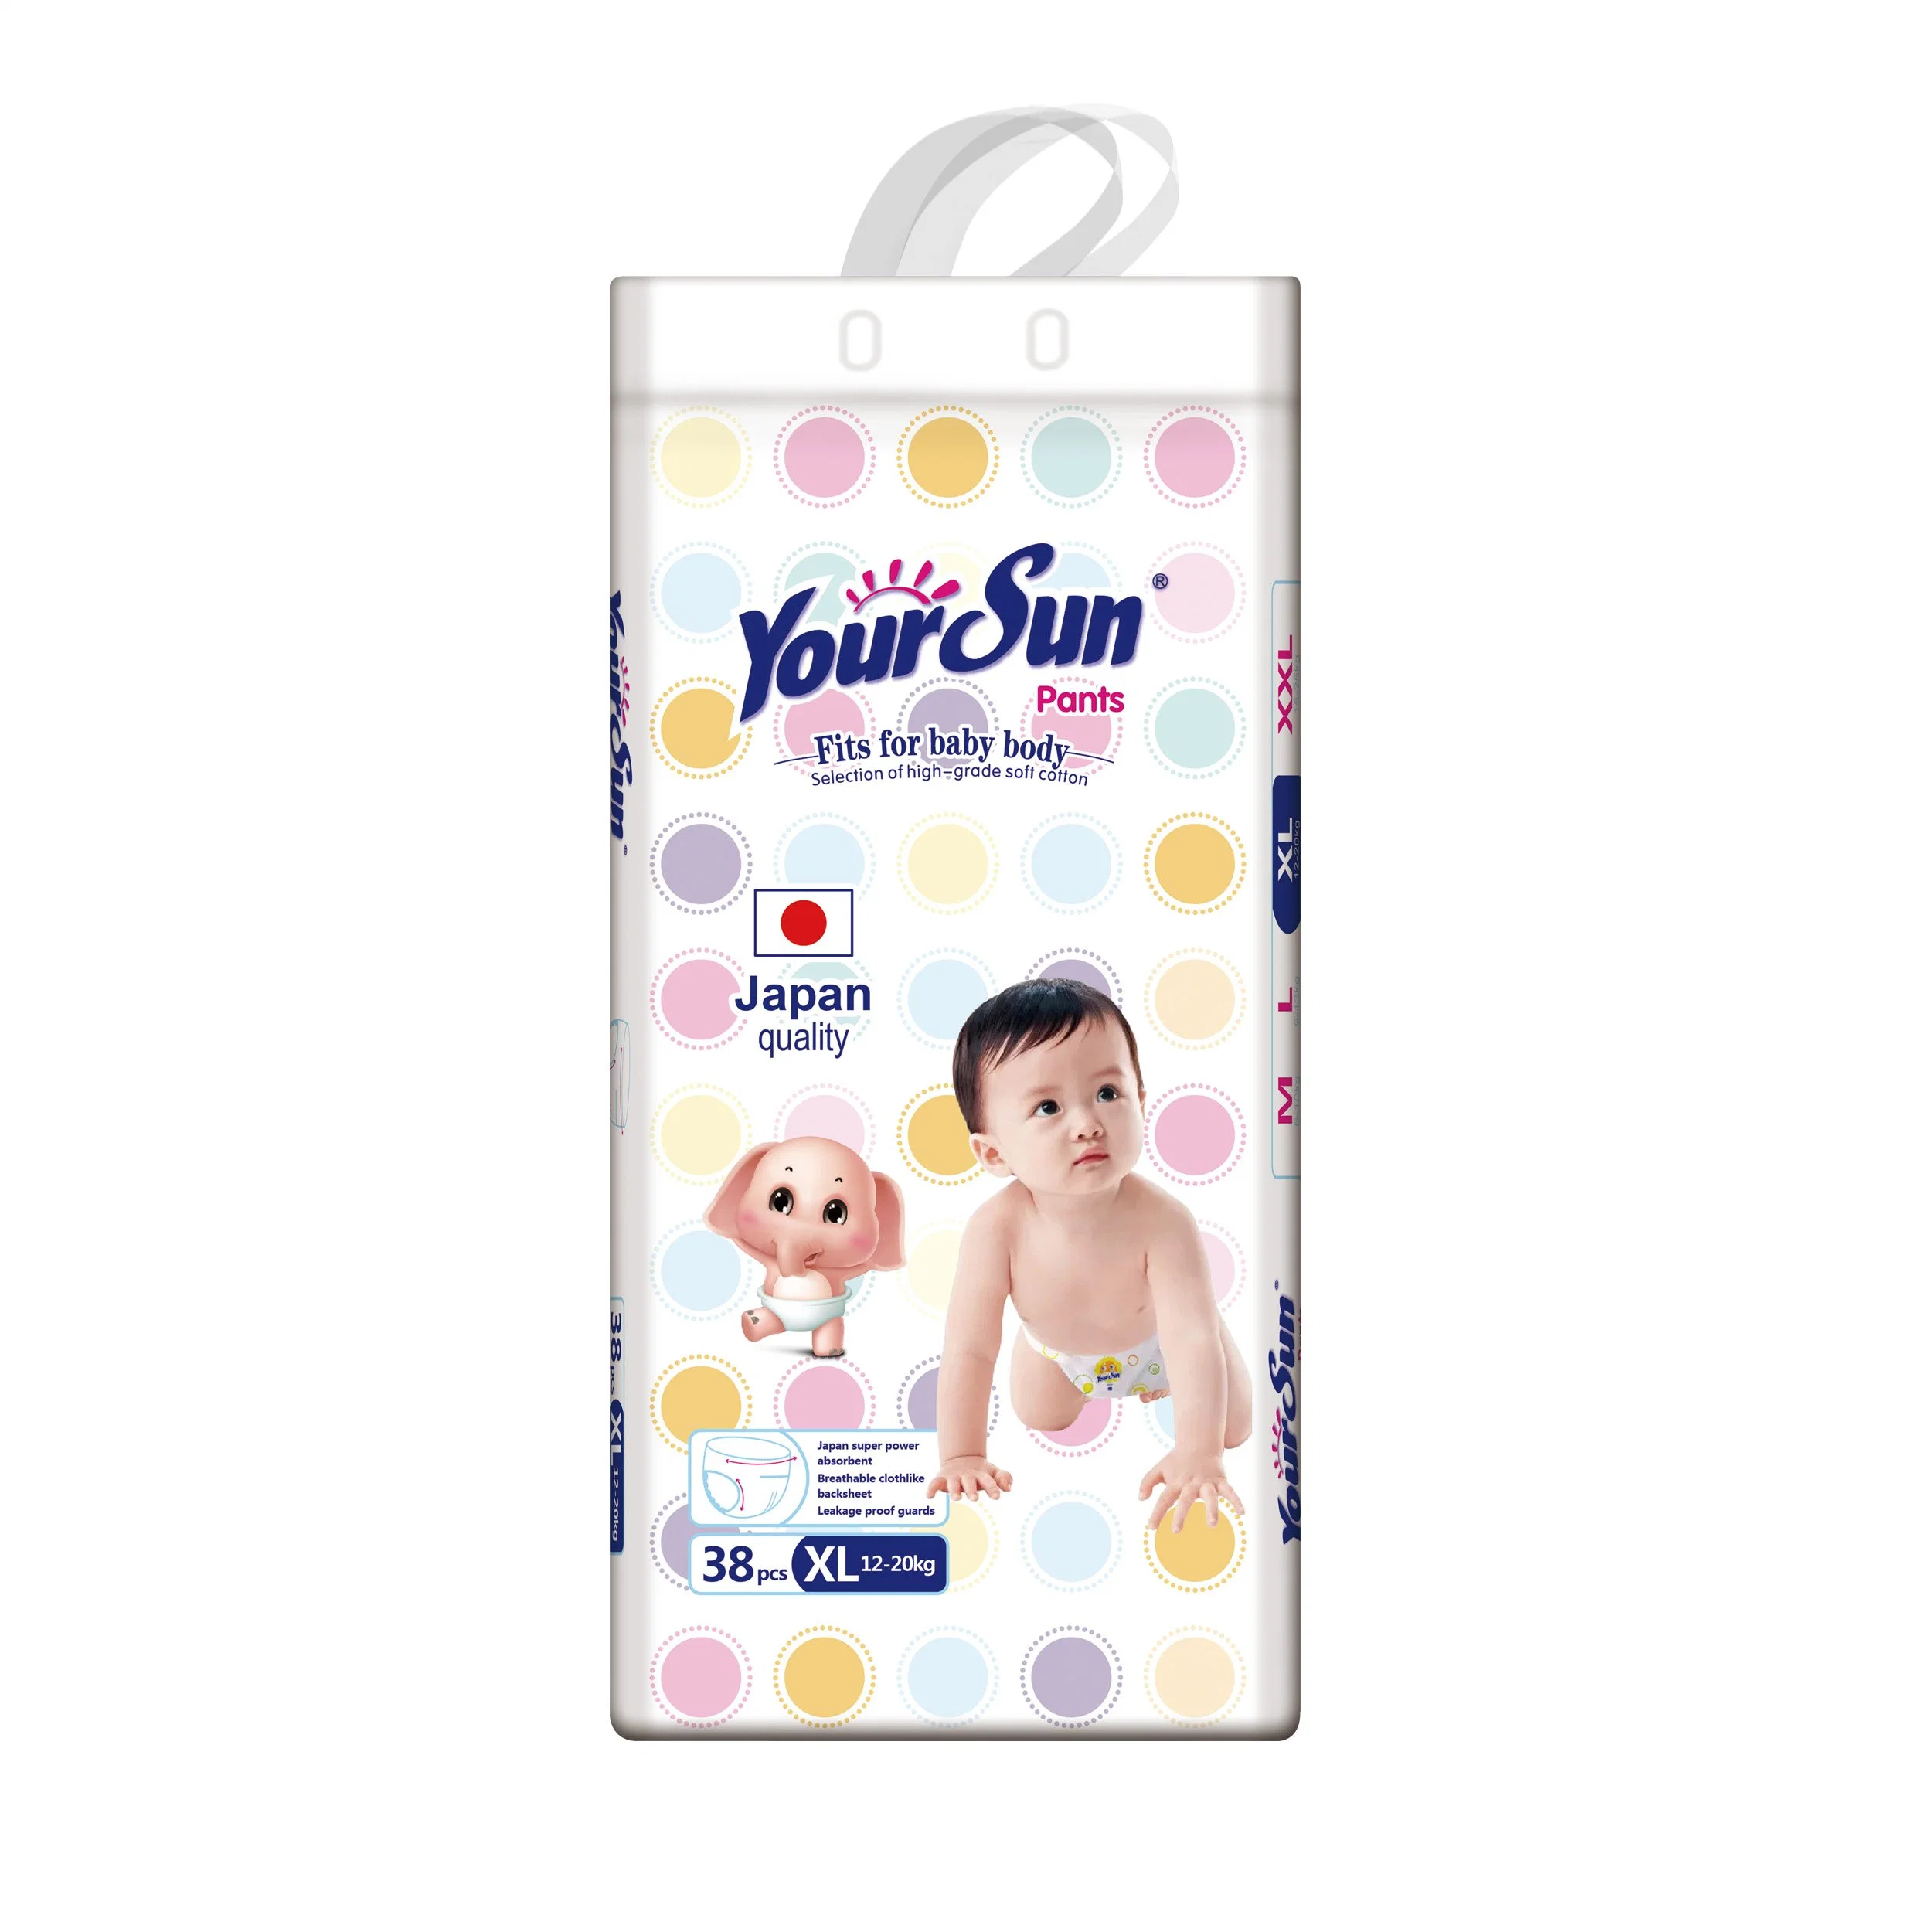 Yoursun Baby Pants Super Soft and Economy Item